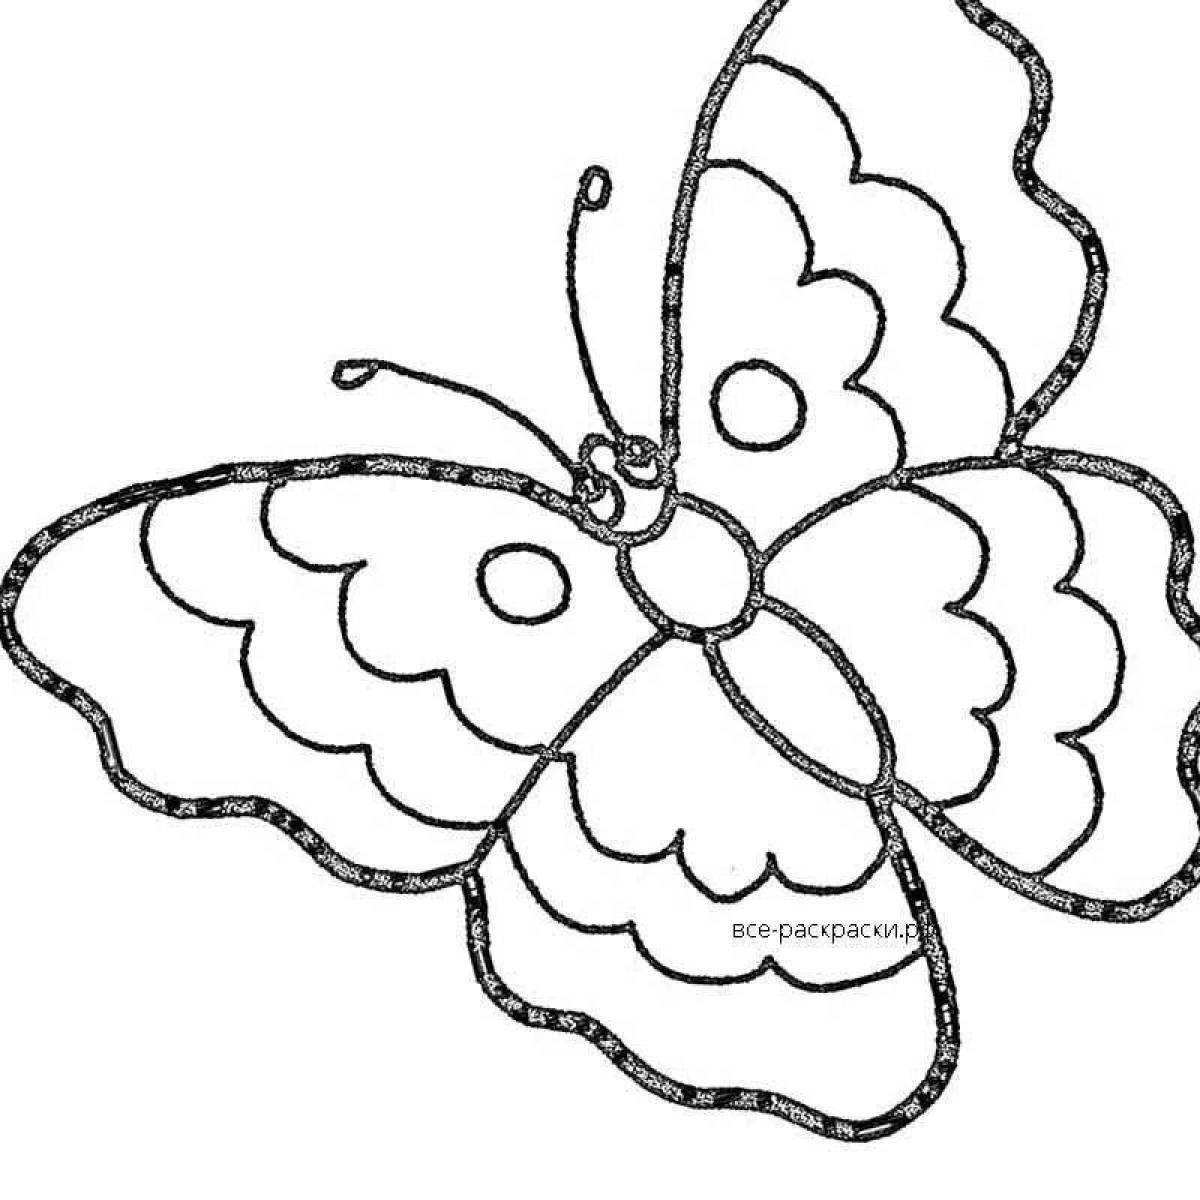 Fabulous butterfly coloring book for children 5-6 years old